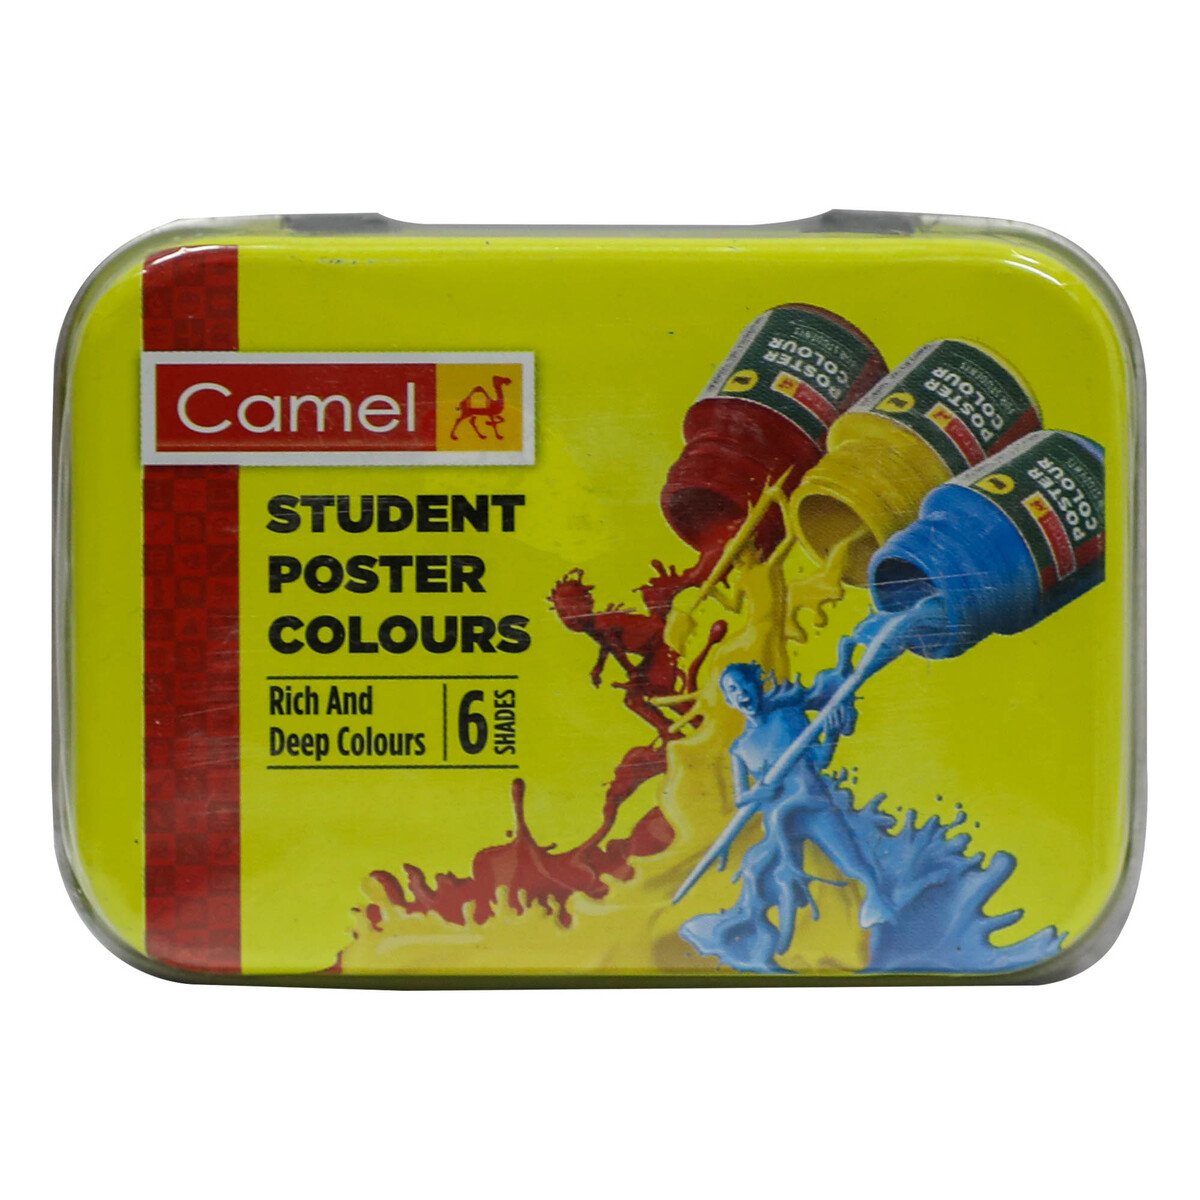 Camel Student Poster Colours 6 Shades